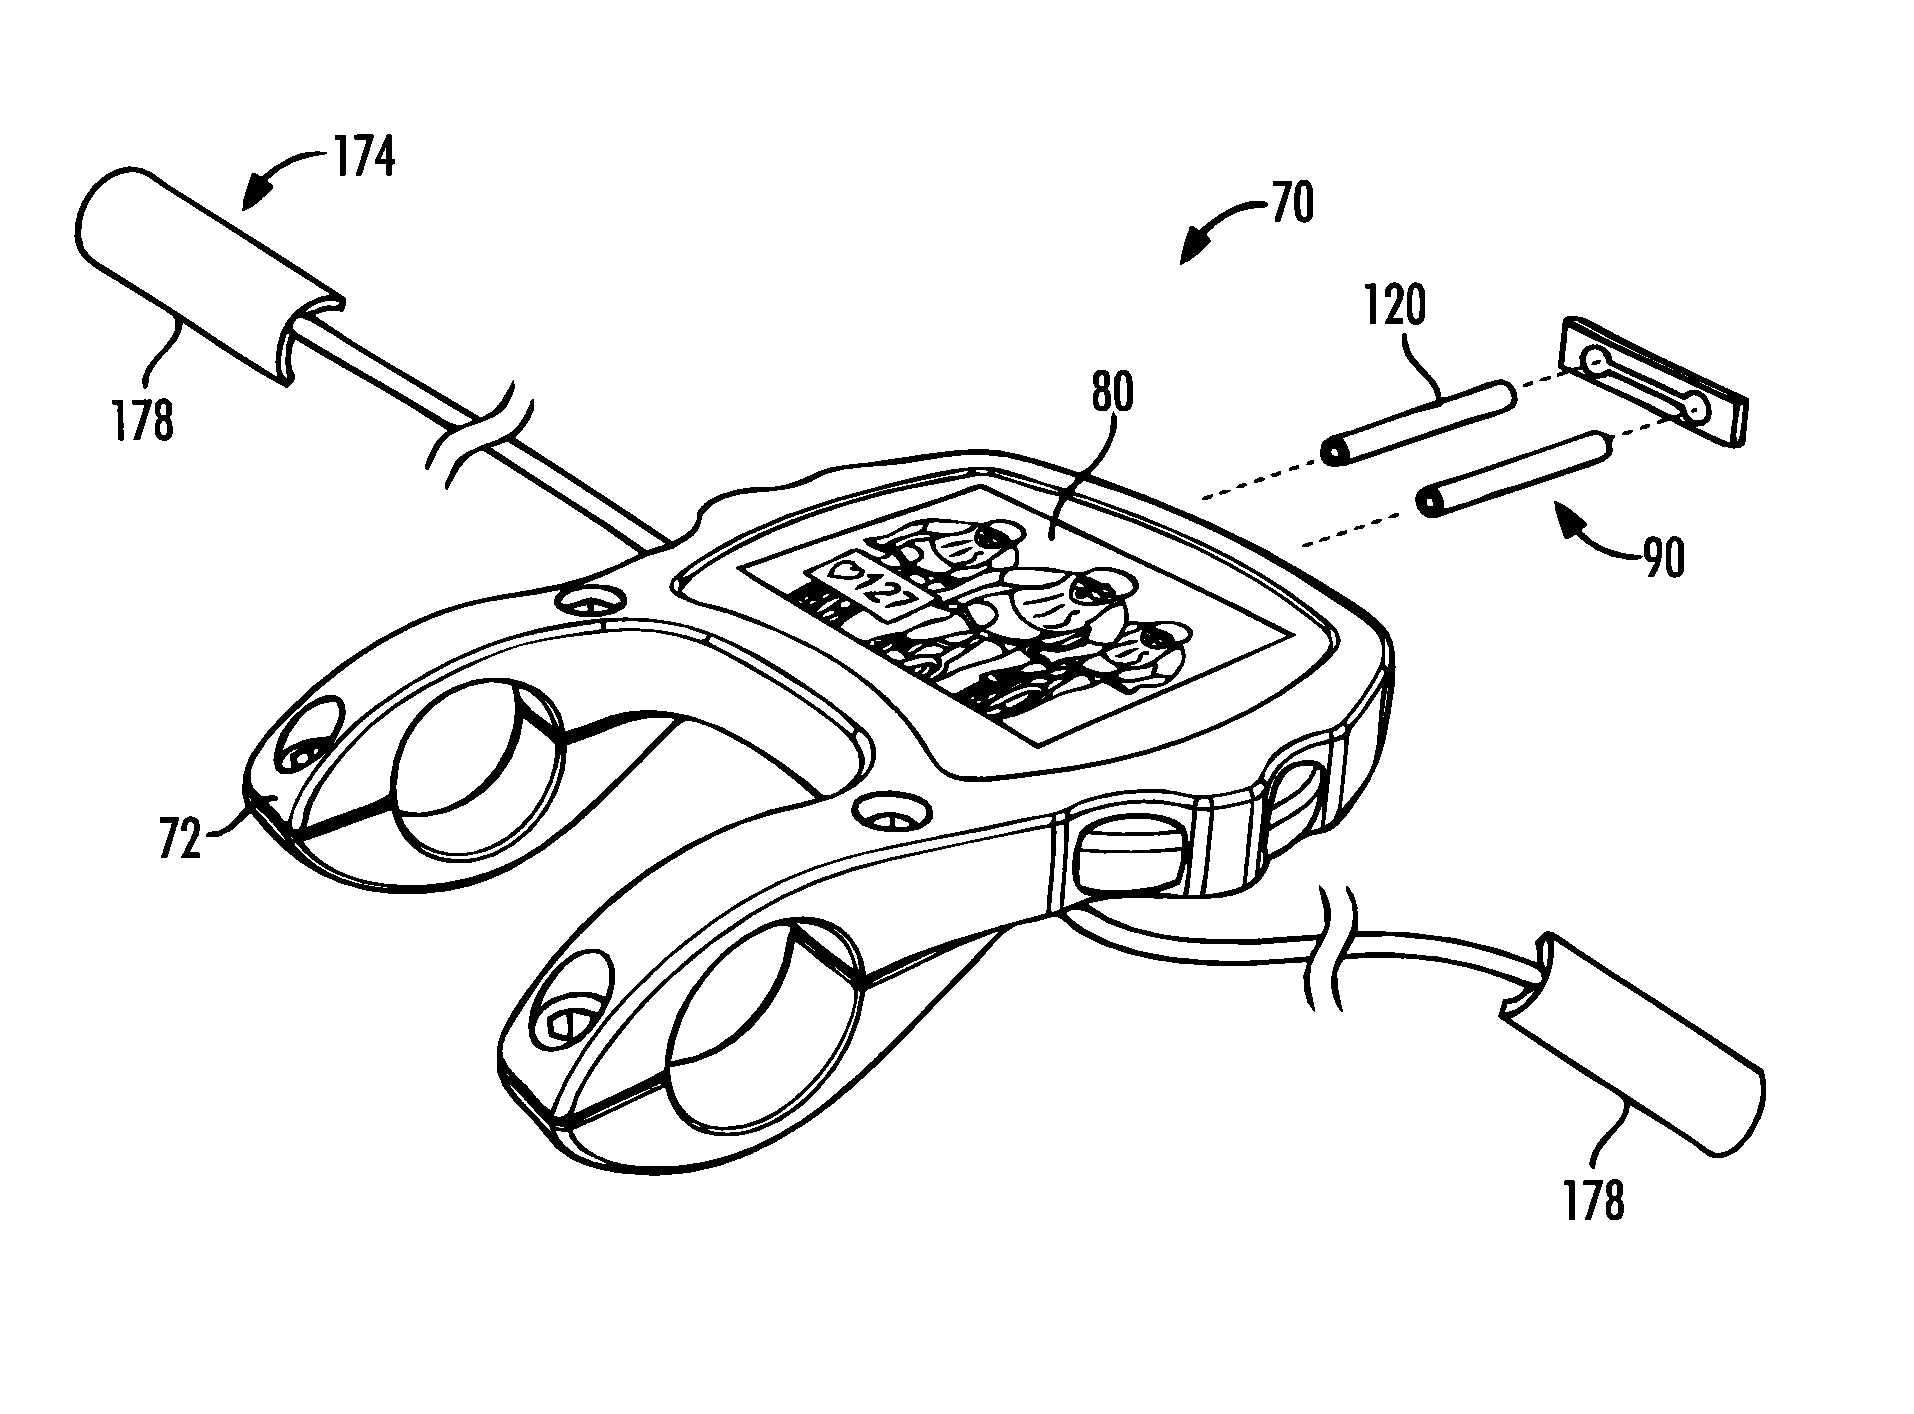 Rear-view display system for a bicycle